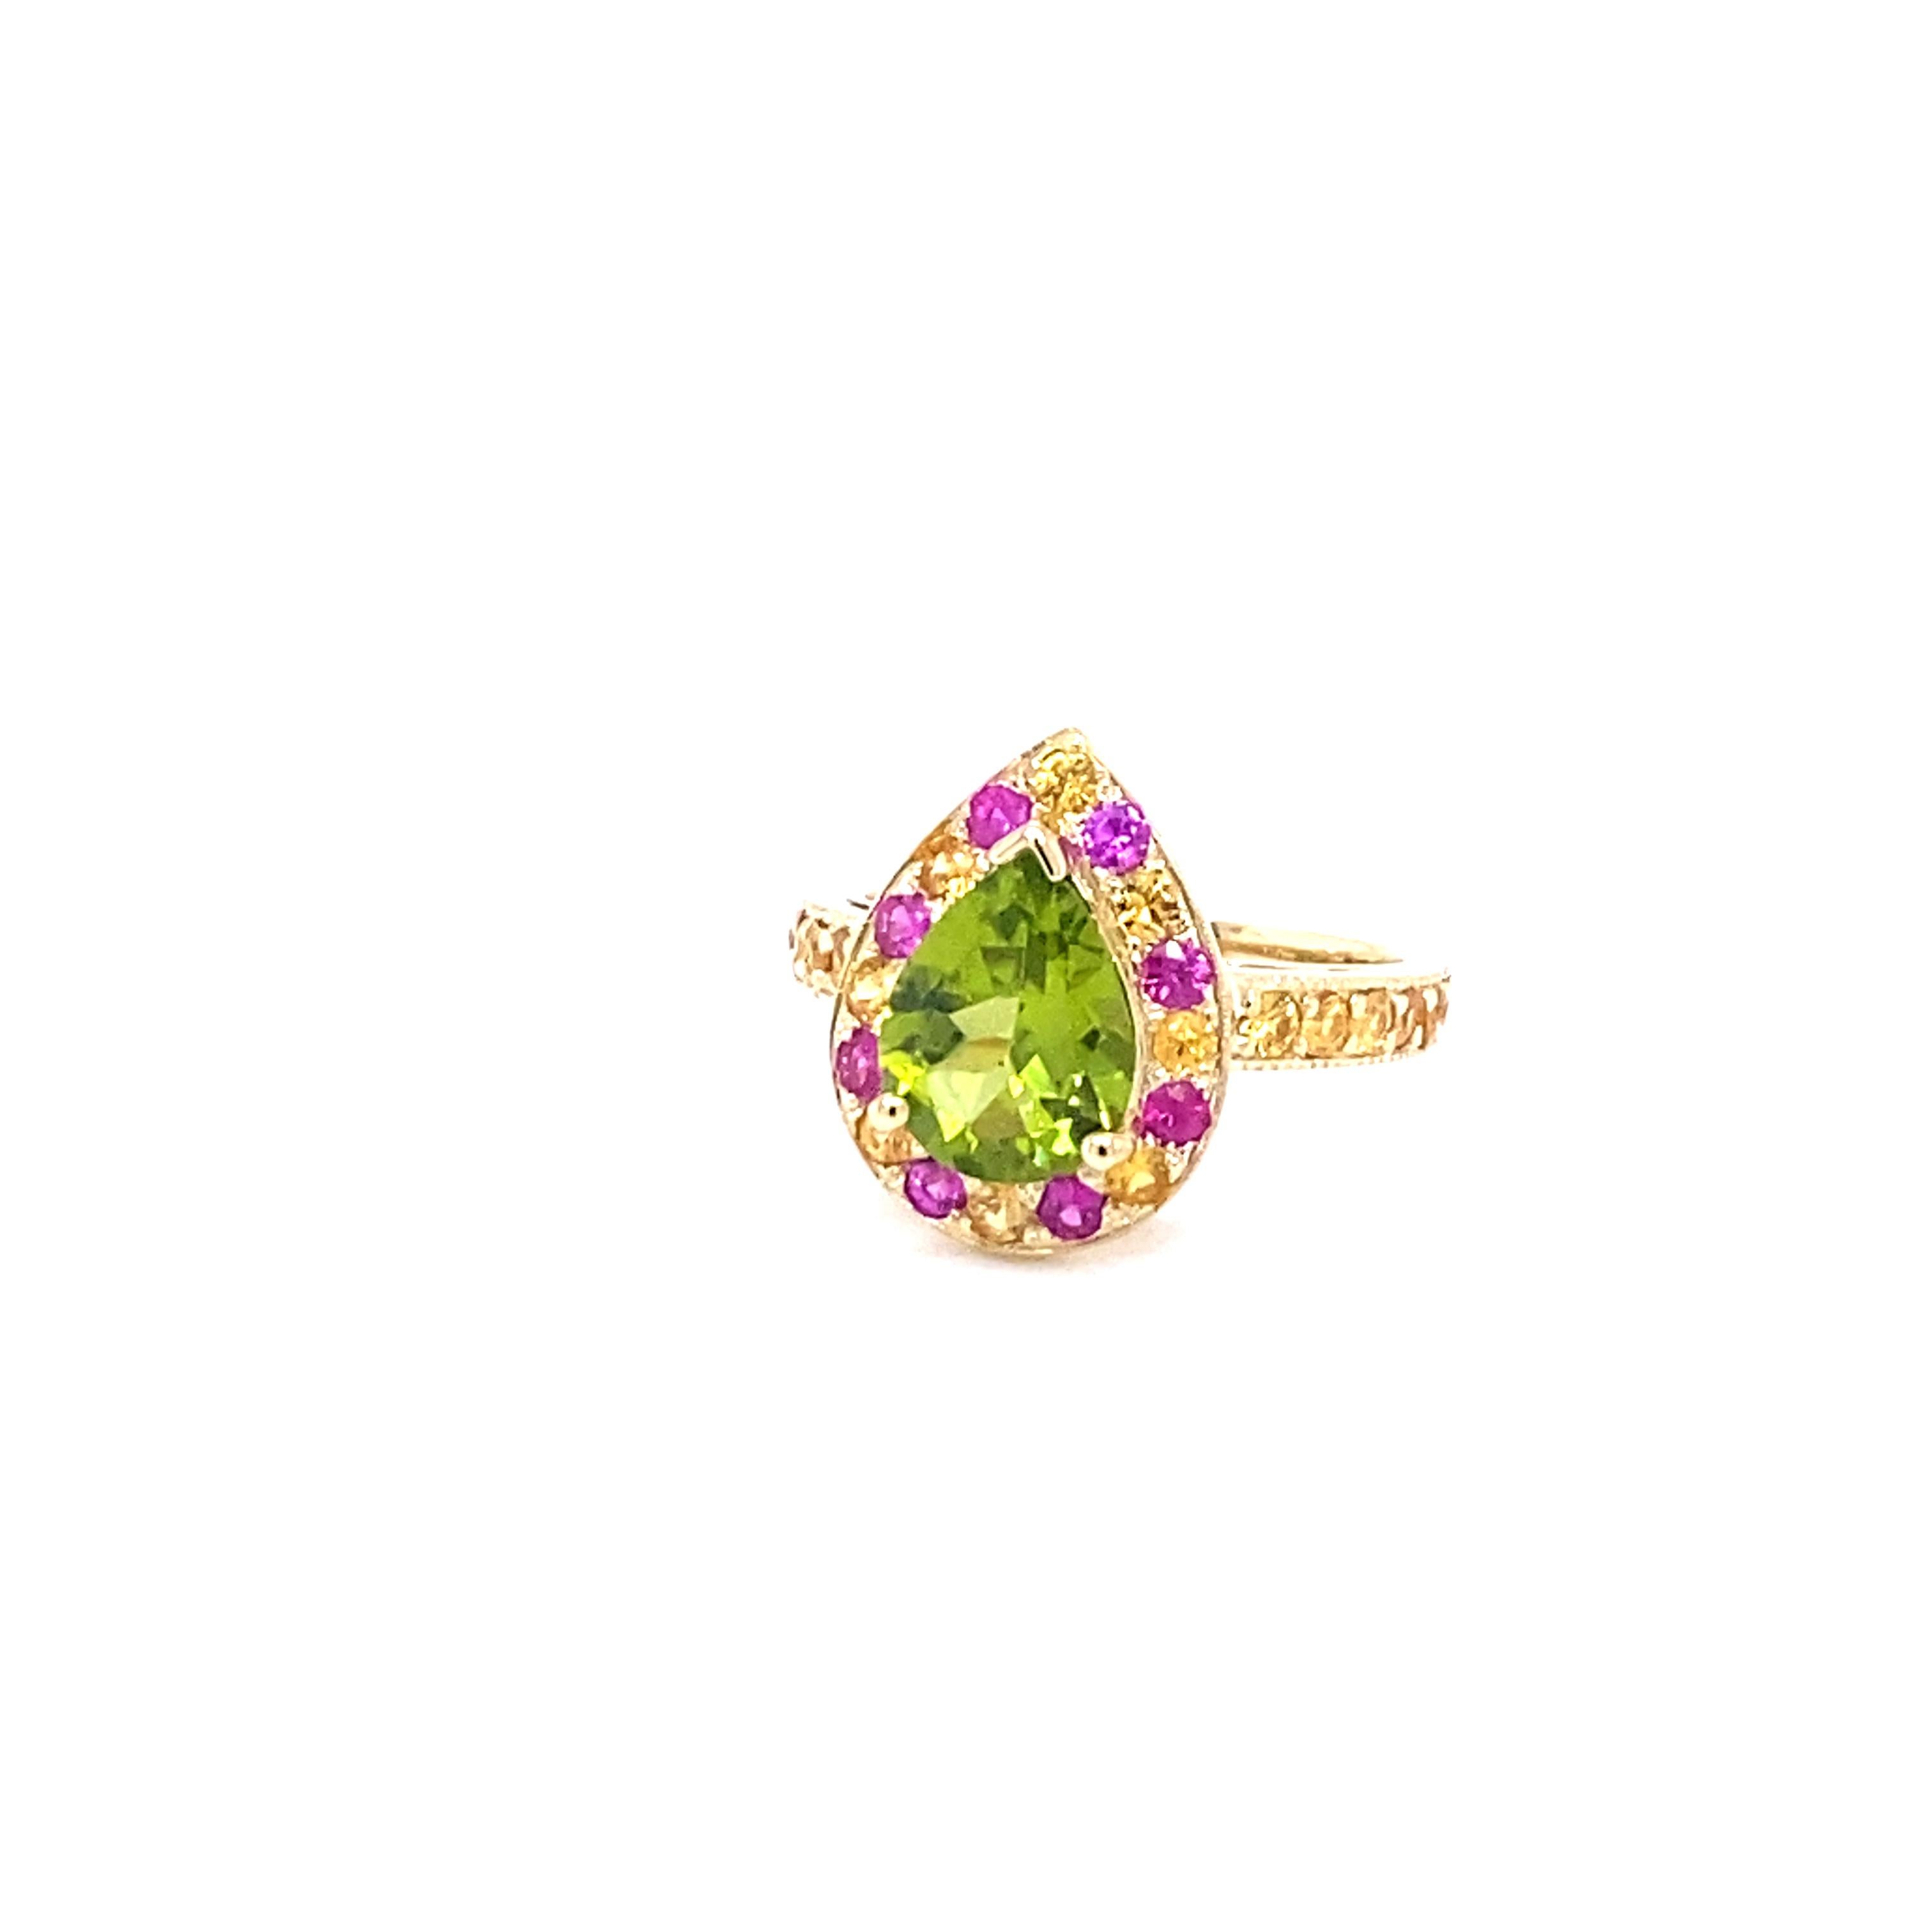 3.16 Carat Peridot Sapphire Yellow Gold Engagement Ring

This beautiful ring has a Pear Cut Peridot in the center that weighs 2.00 Carats.  The Peridot is embellished with 28 alternating Pink and Yellow Sapphires that weigh a total of 1.16